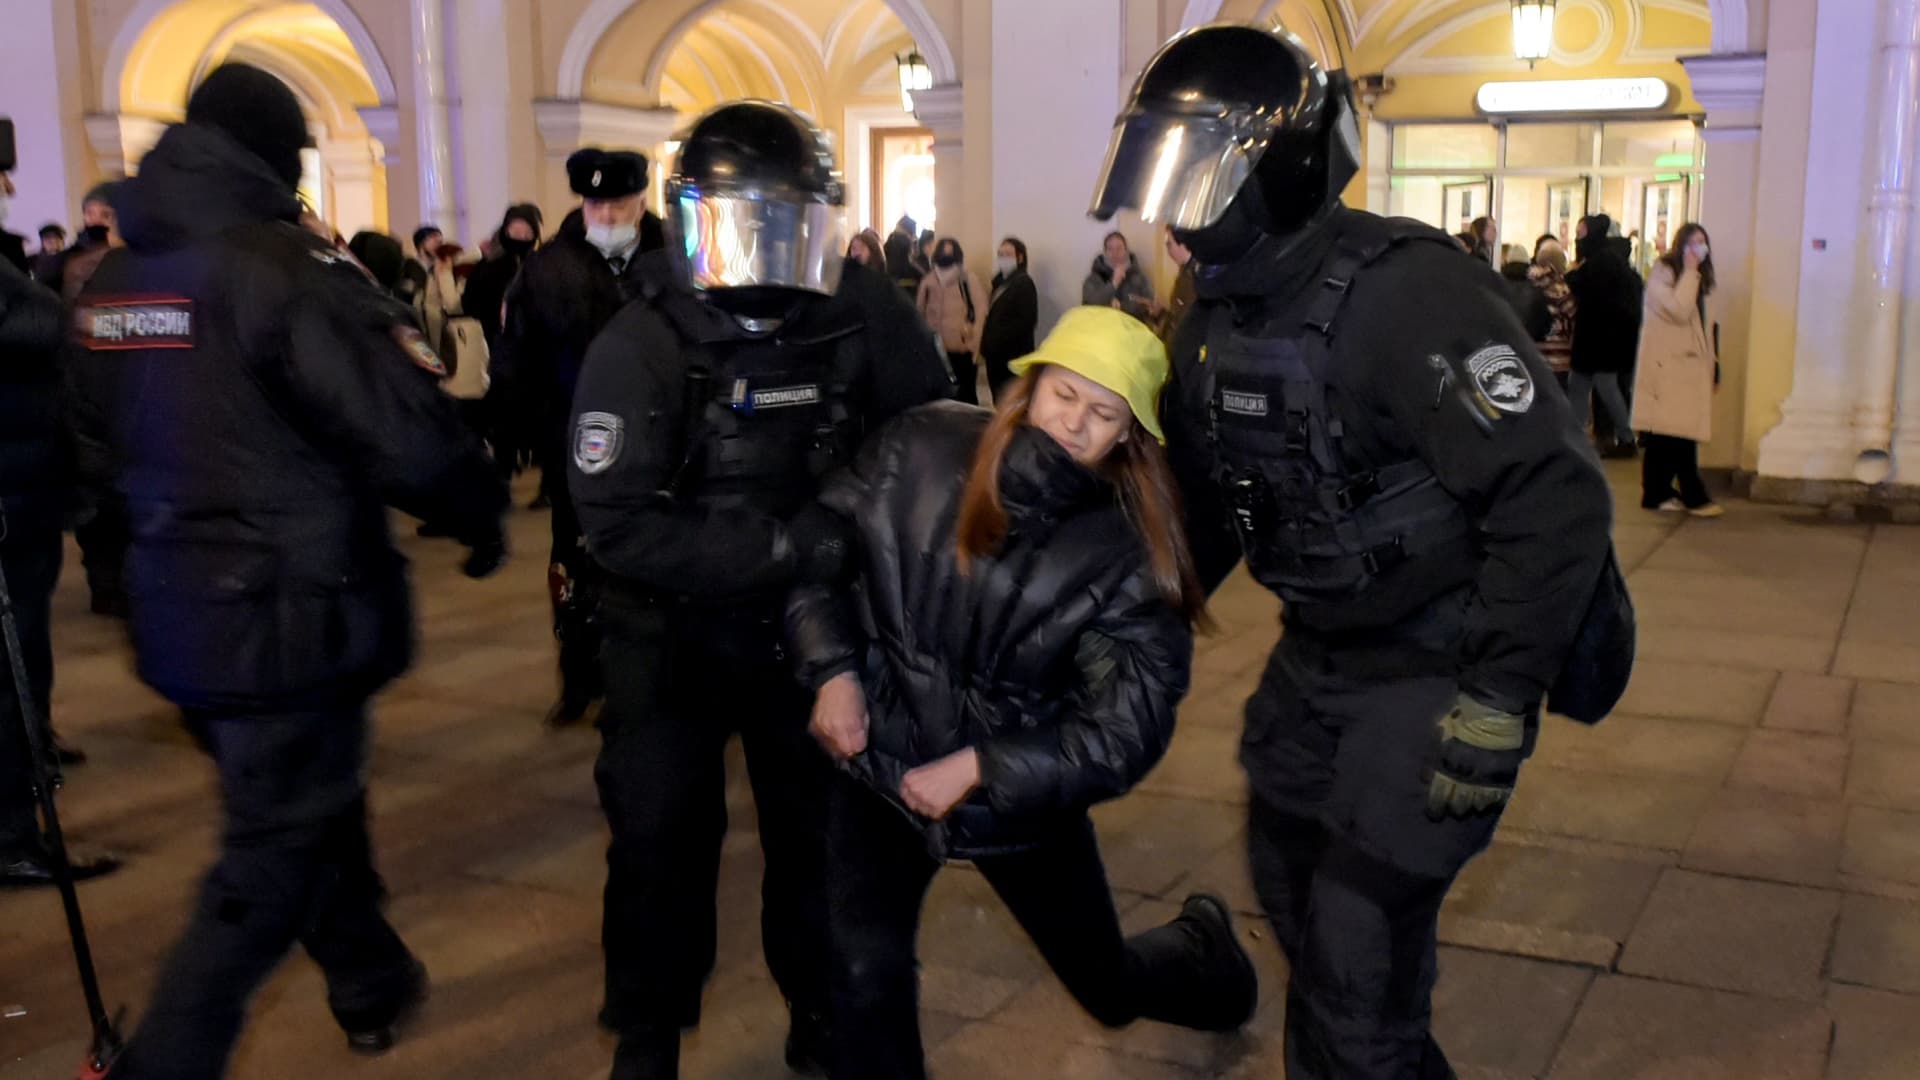 Police officers detain a demonstrator during a protest against Russia's invasion of Ukraine in central Saint Petersburg on March 1, 2022.